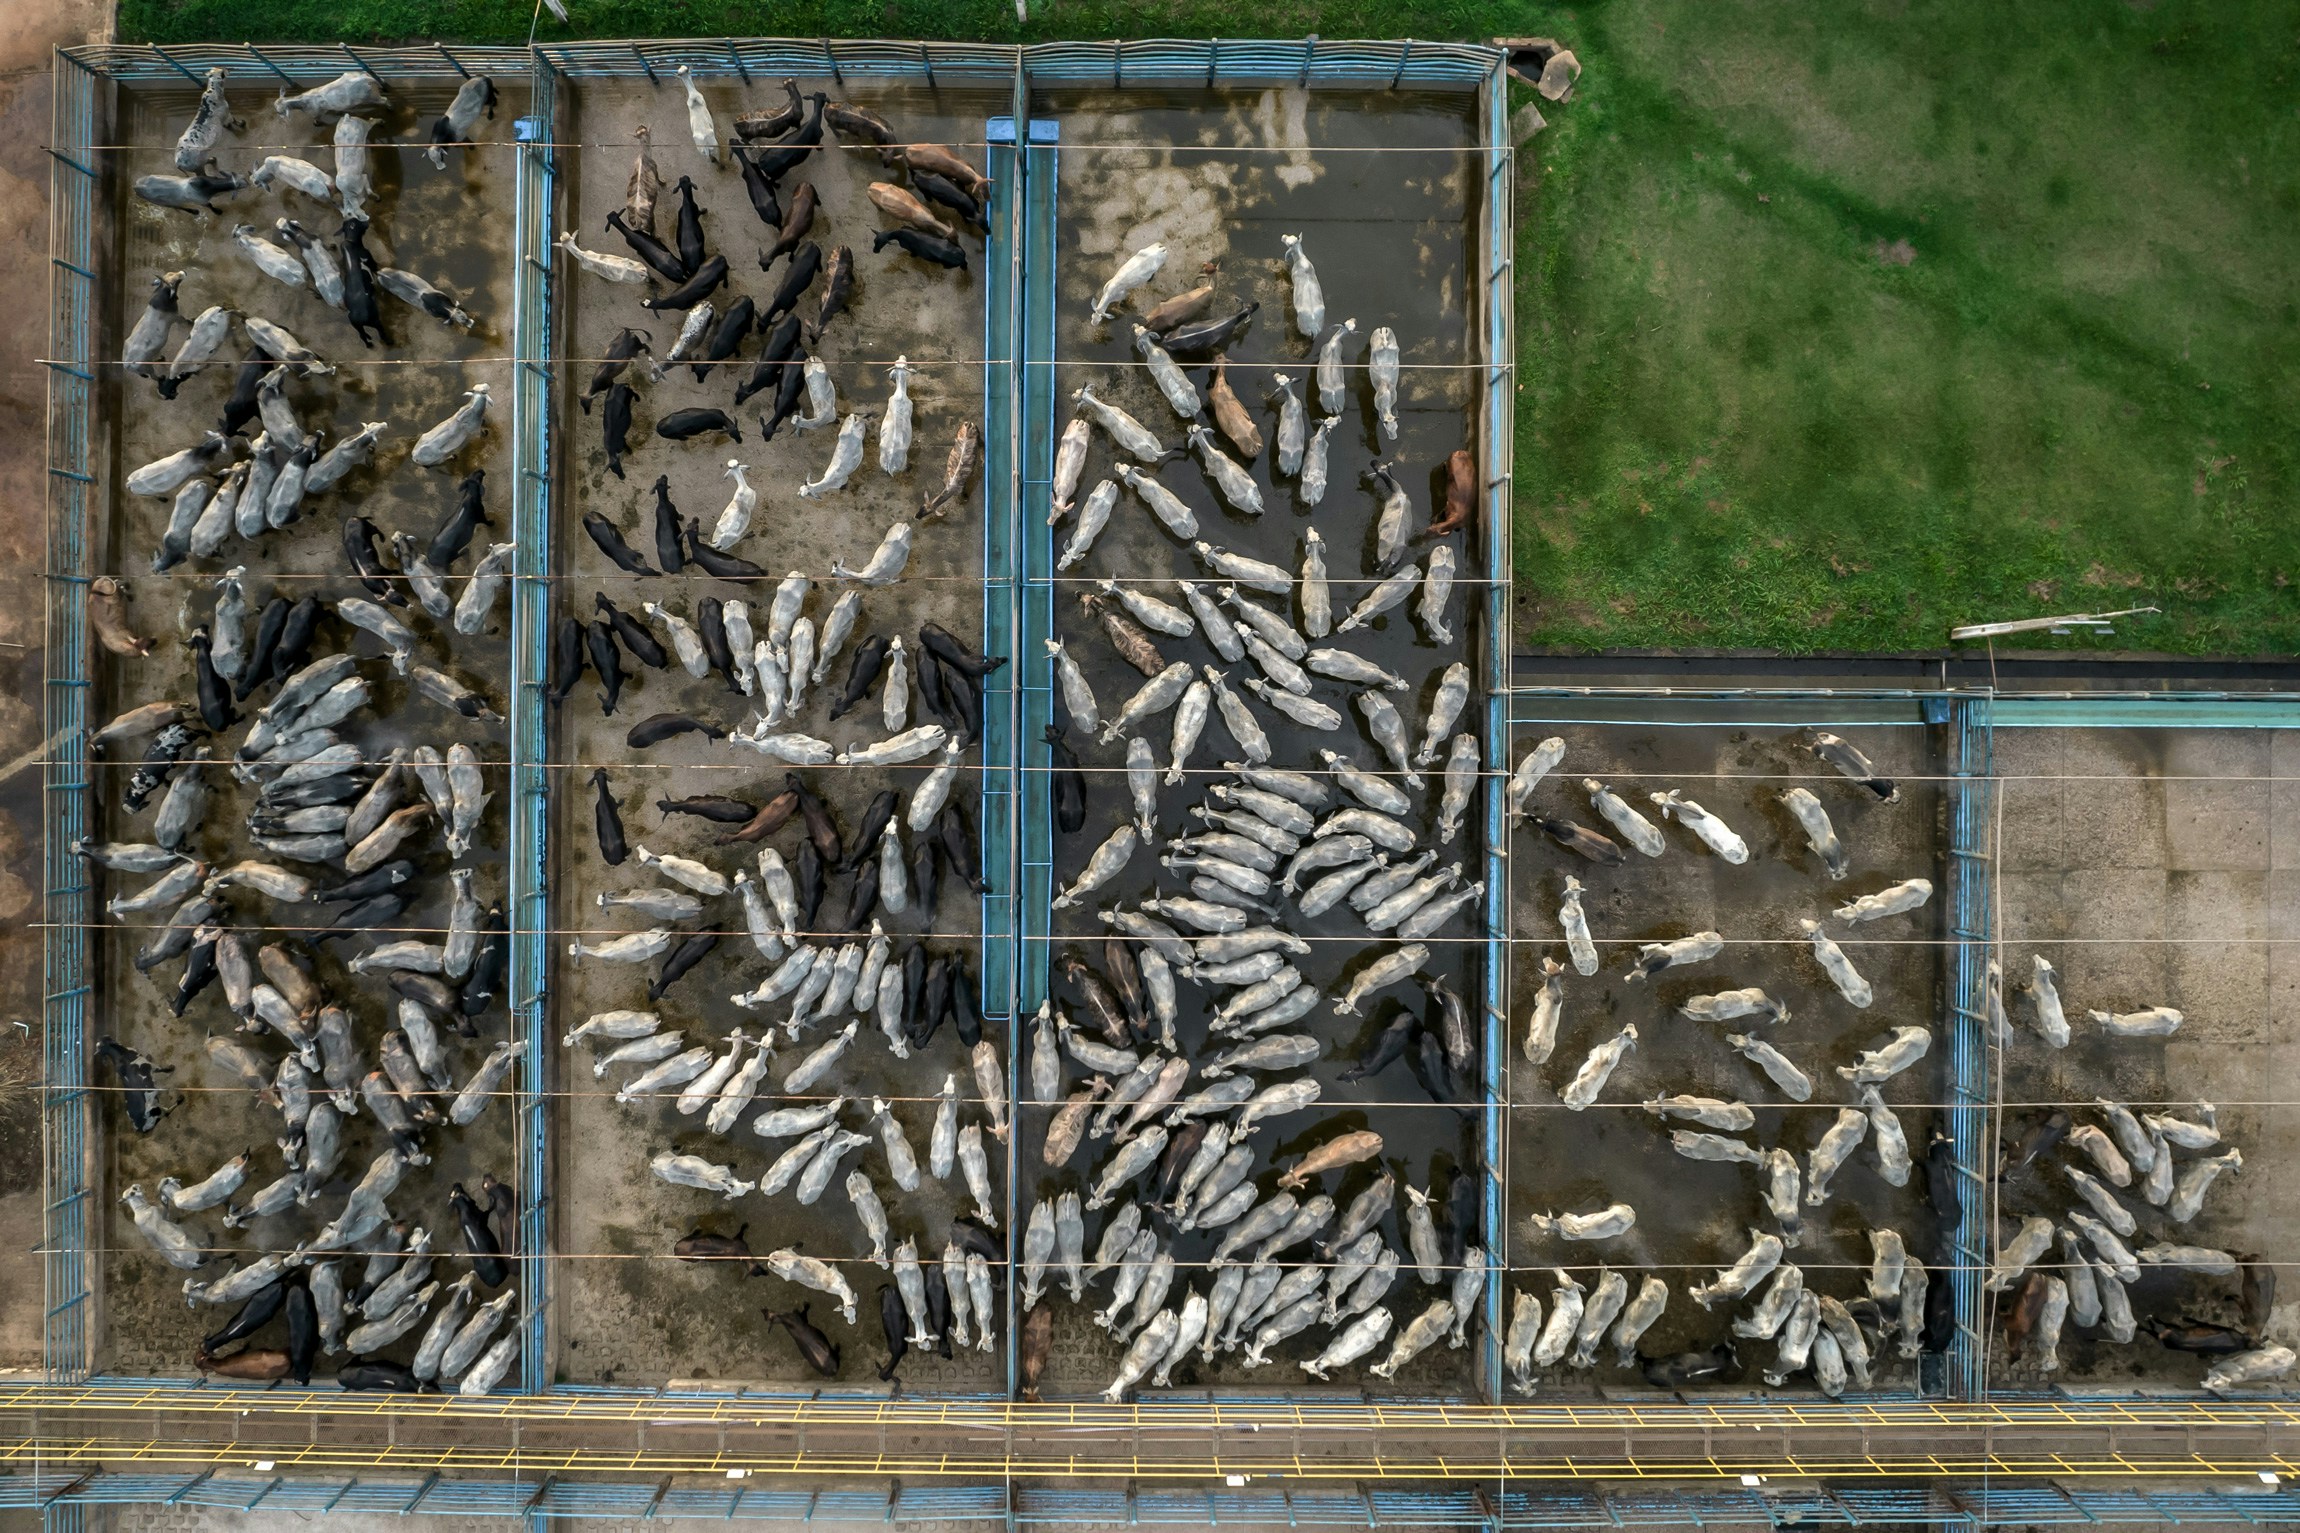 Cattle at a JBS SA facility in Tucuma, Para state, Brazil, on Tuesday, Oct. 5, 2021. Six European retail groups, including Sainsbury's in the United Kingdom and Carrefour in Belgium, are restricting Brazilian beef purchases due to new findings linking cattle production to deforestation in the Amazon, Cerrado and Pantanal. Photographer: Jonne Roriz/Bloomberg via Getty Images